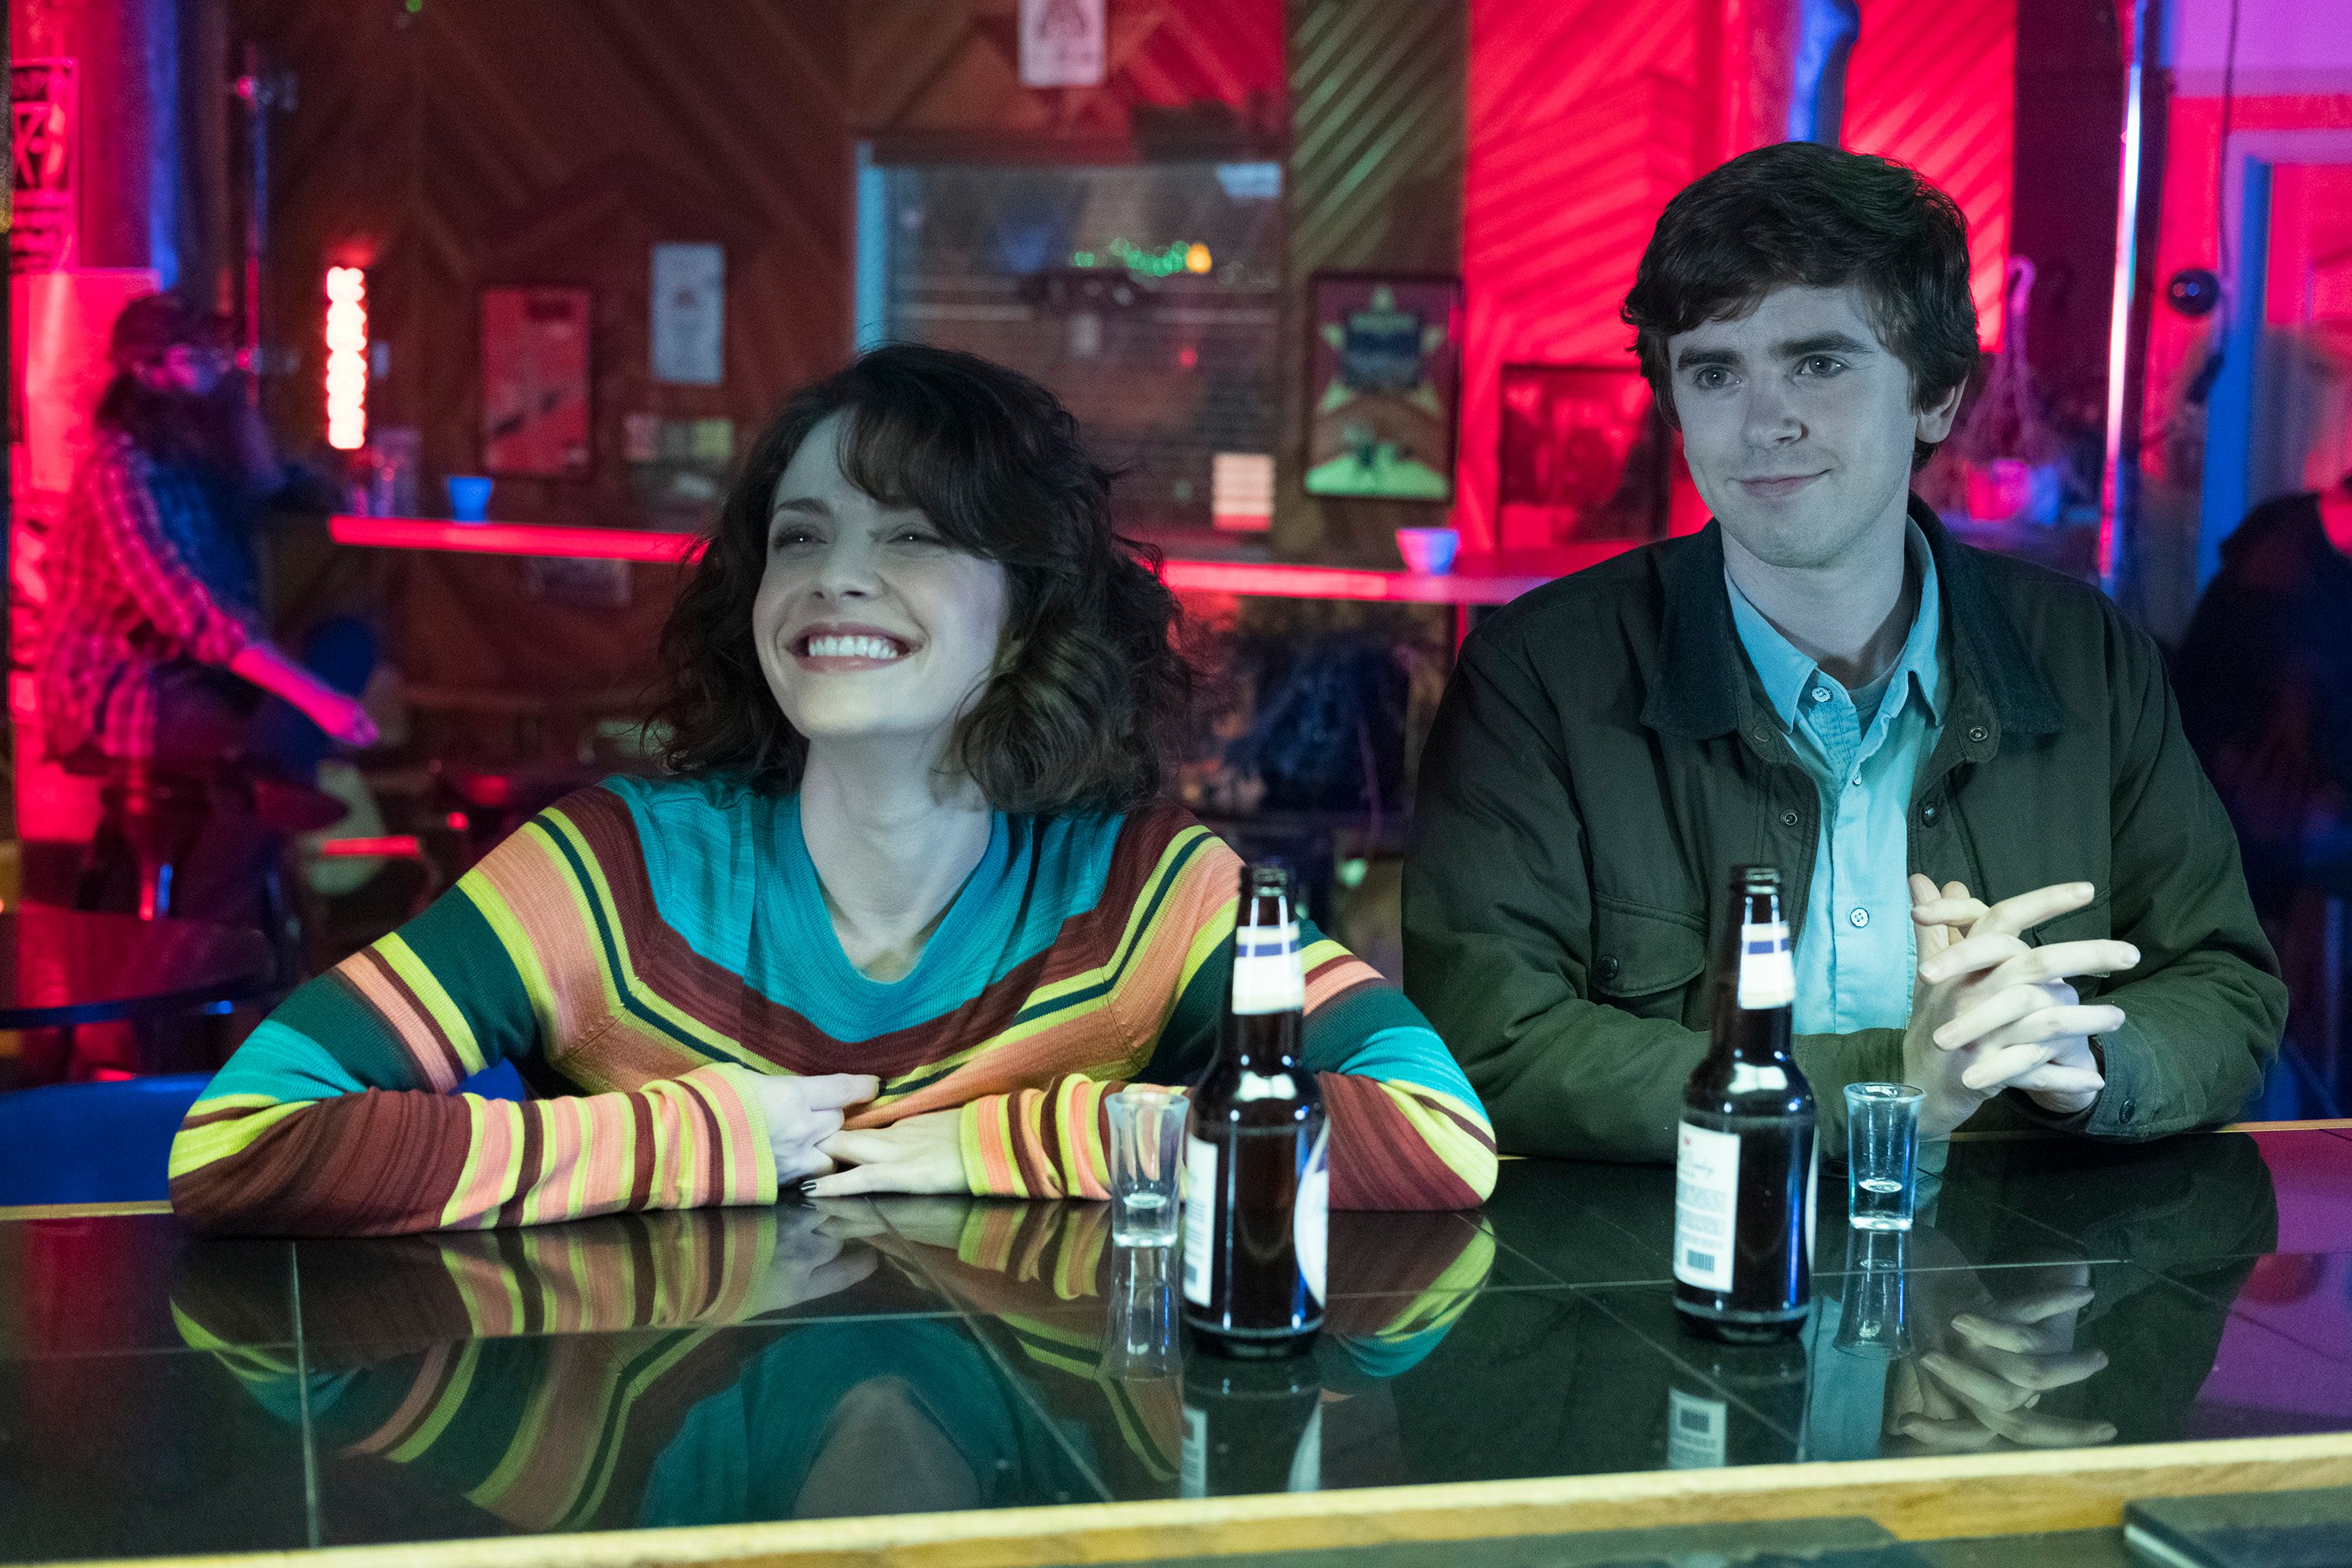 Paige Spara and Freddie Highmore on 'The Good Doctor'  